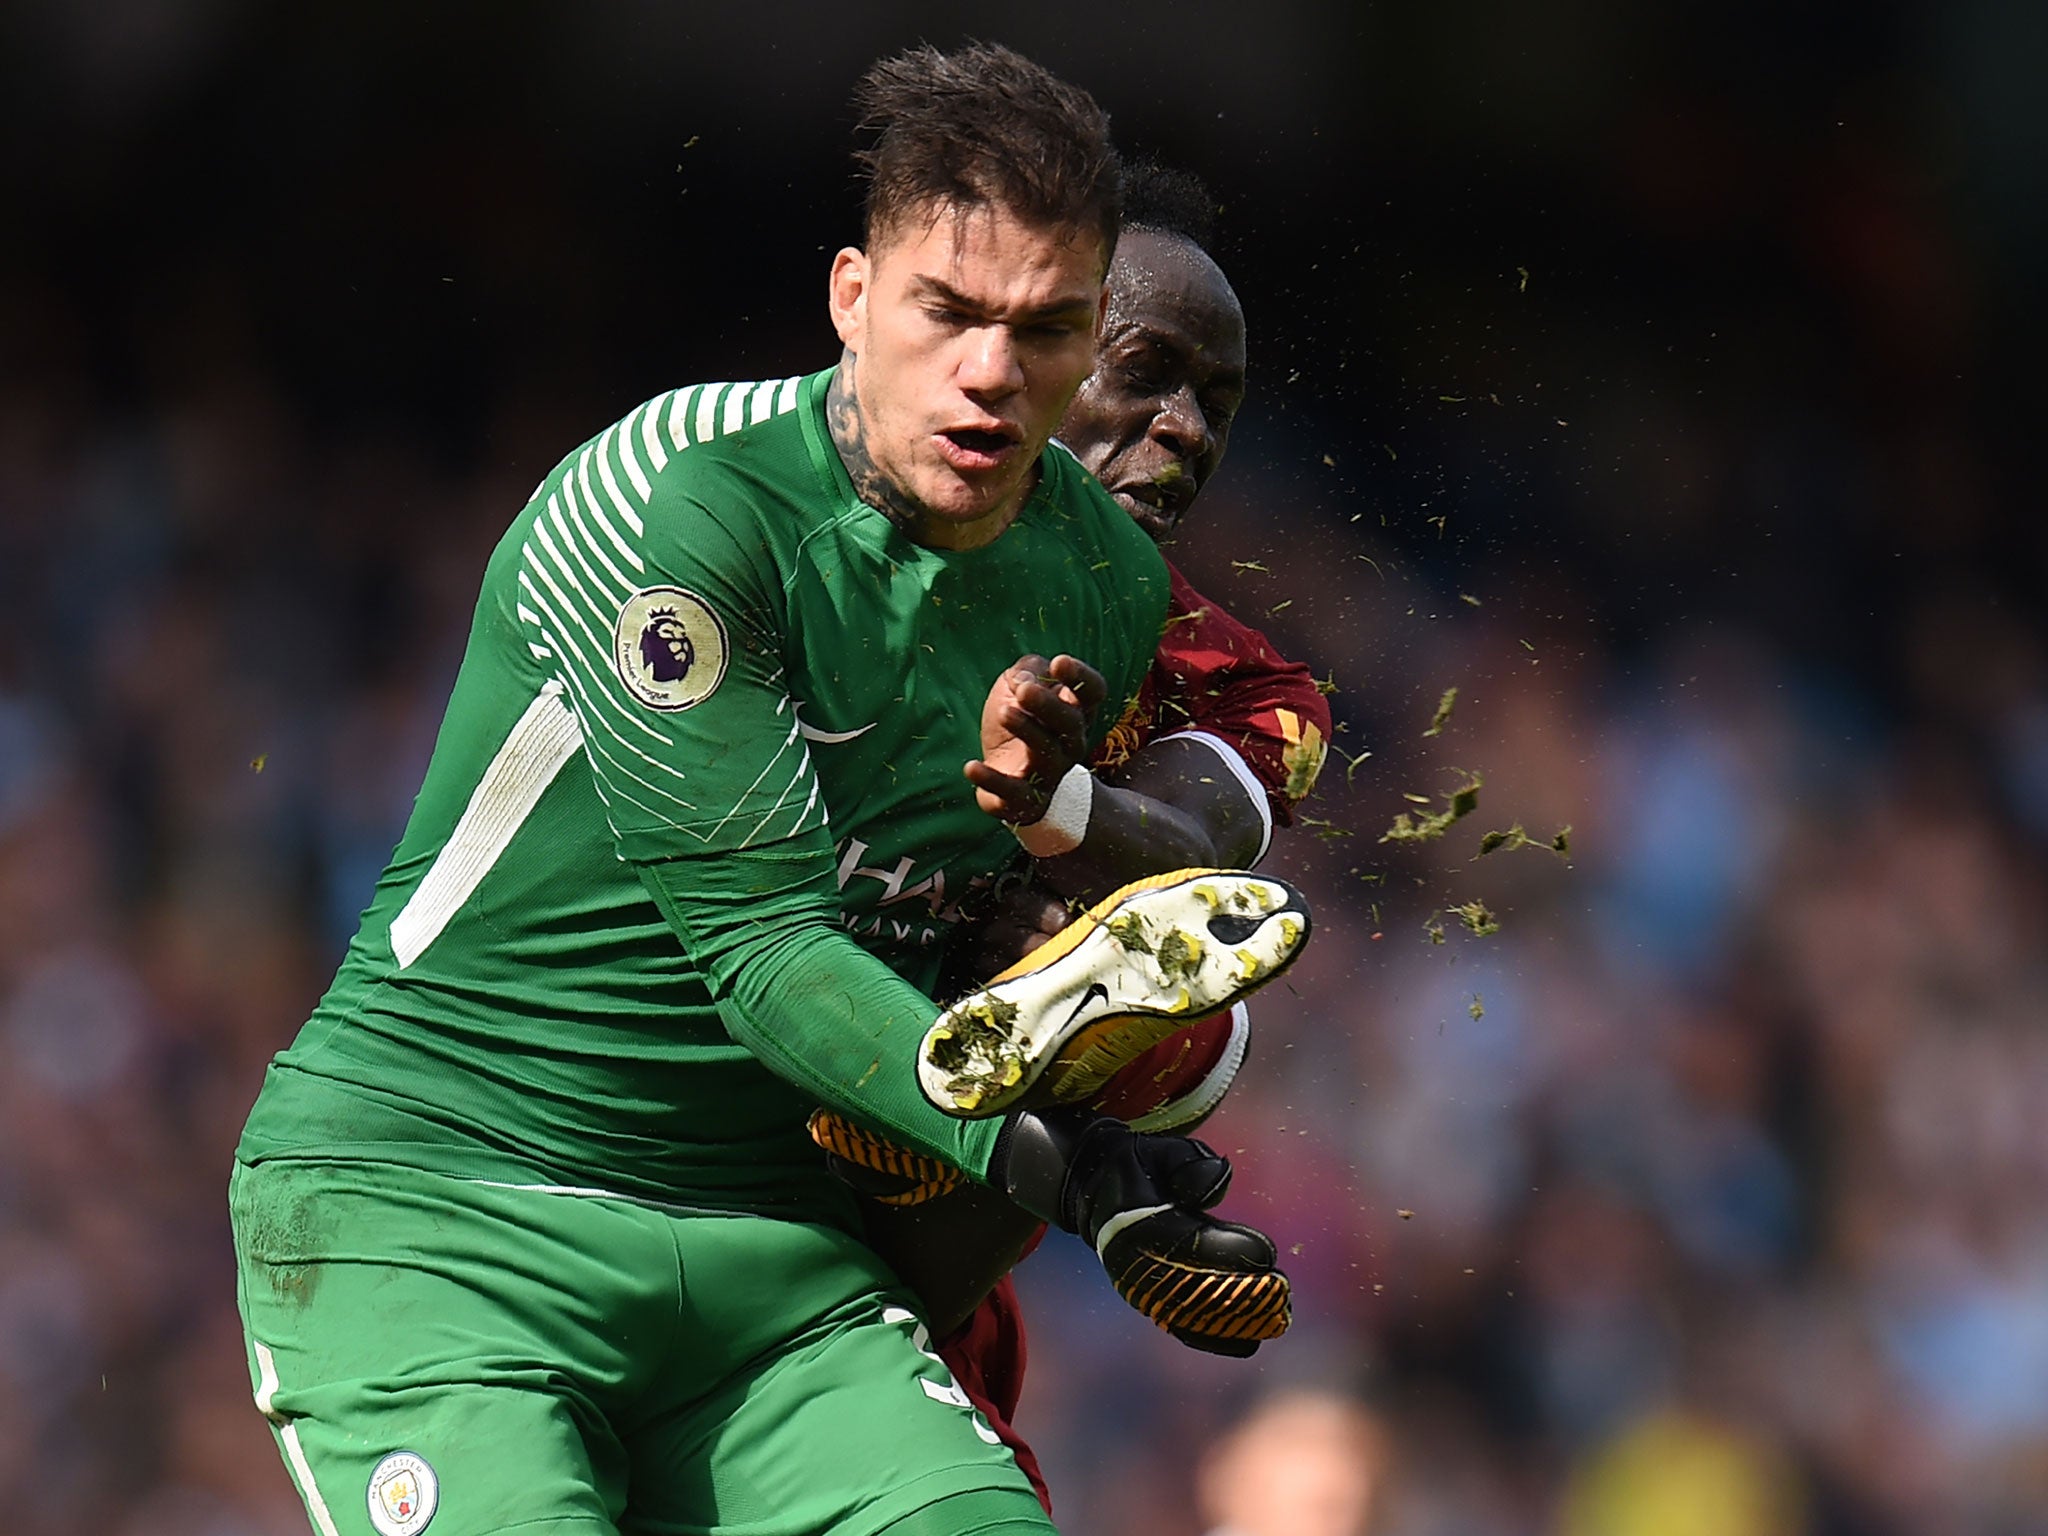 Ederson was caught in the face by a high foot from Sadio Mane